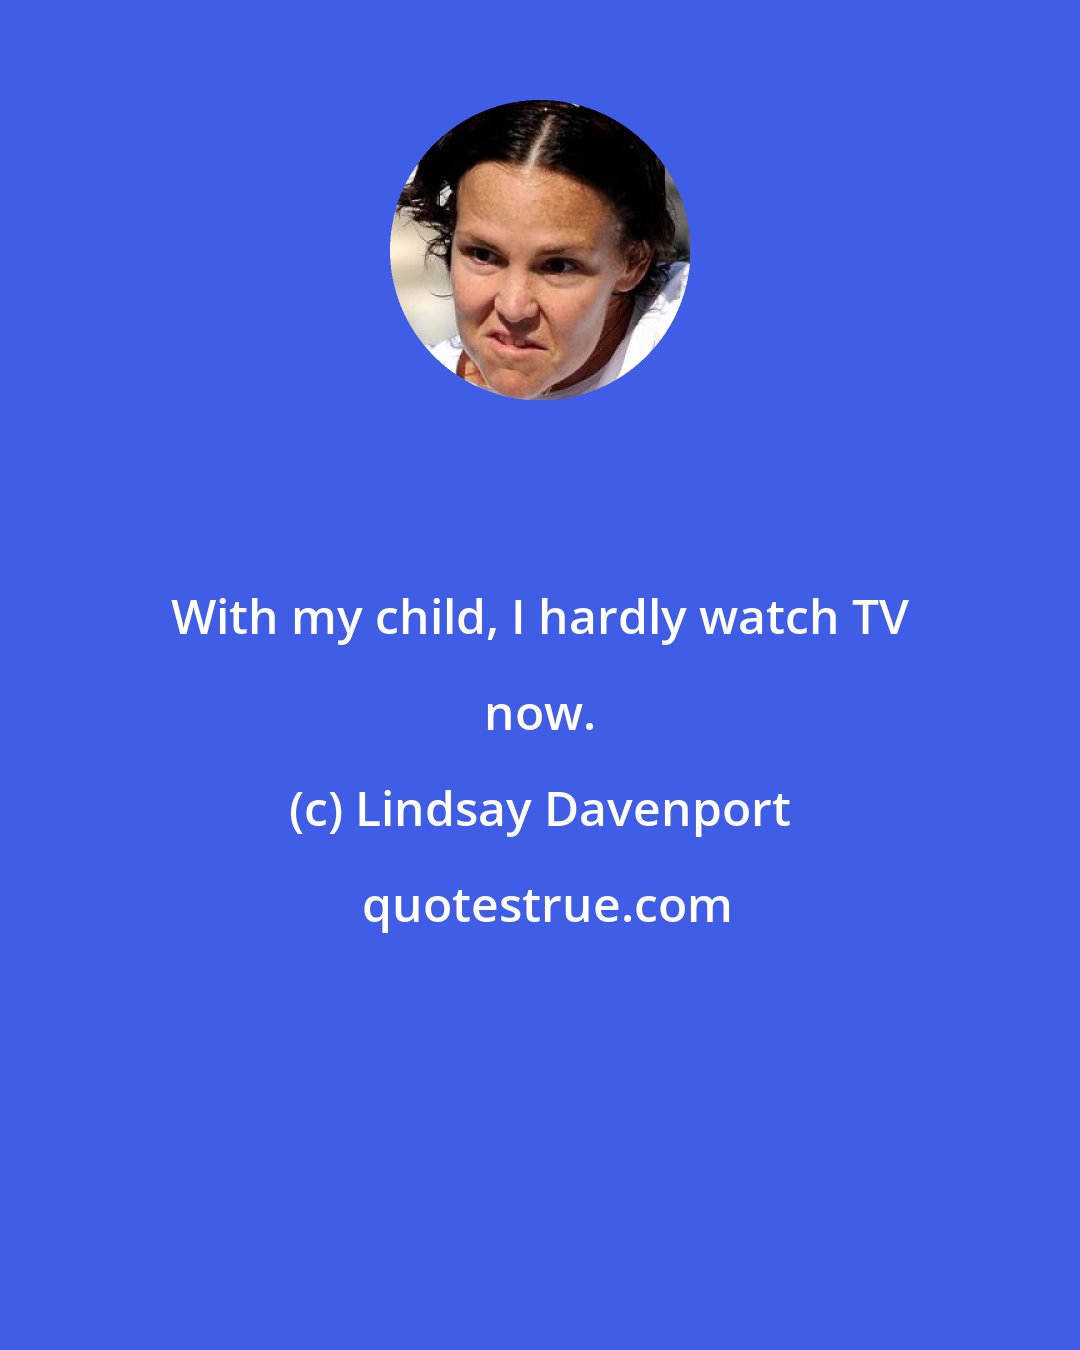 Lindsay Davenport: With my child, I hardly watch TV now.